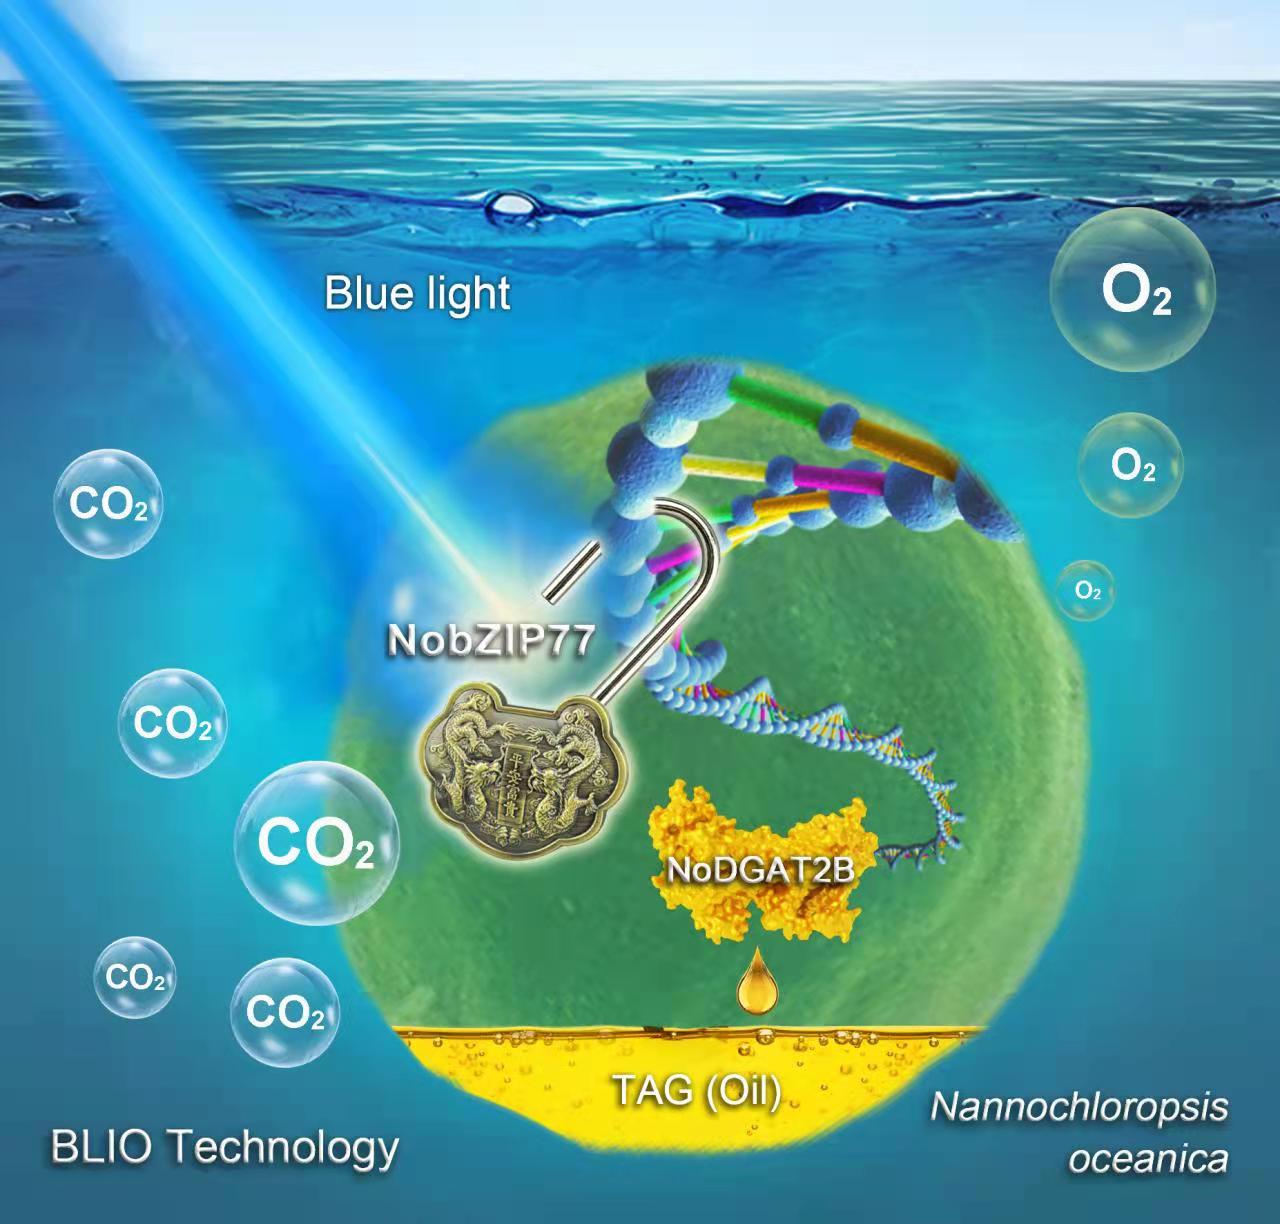 The BLIO technology explores a "genetic switch" to unlock oil production in microalgae. (Image by LIU Yang and ZHANG Peng)